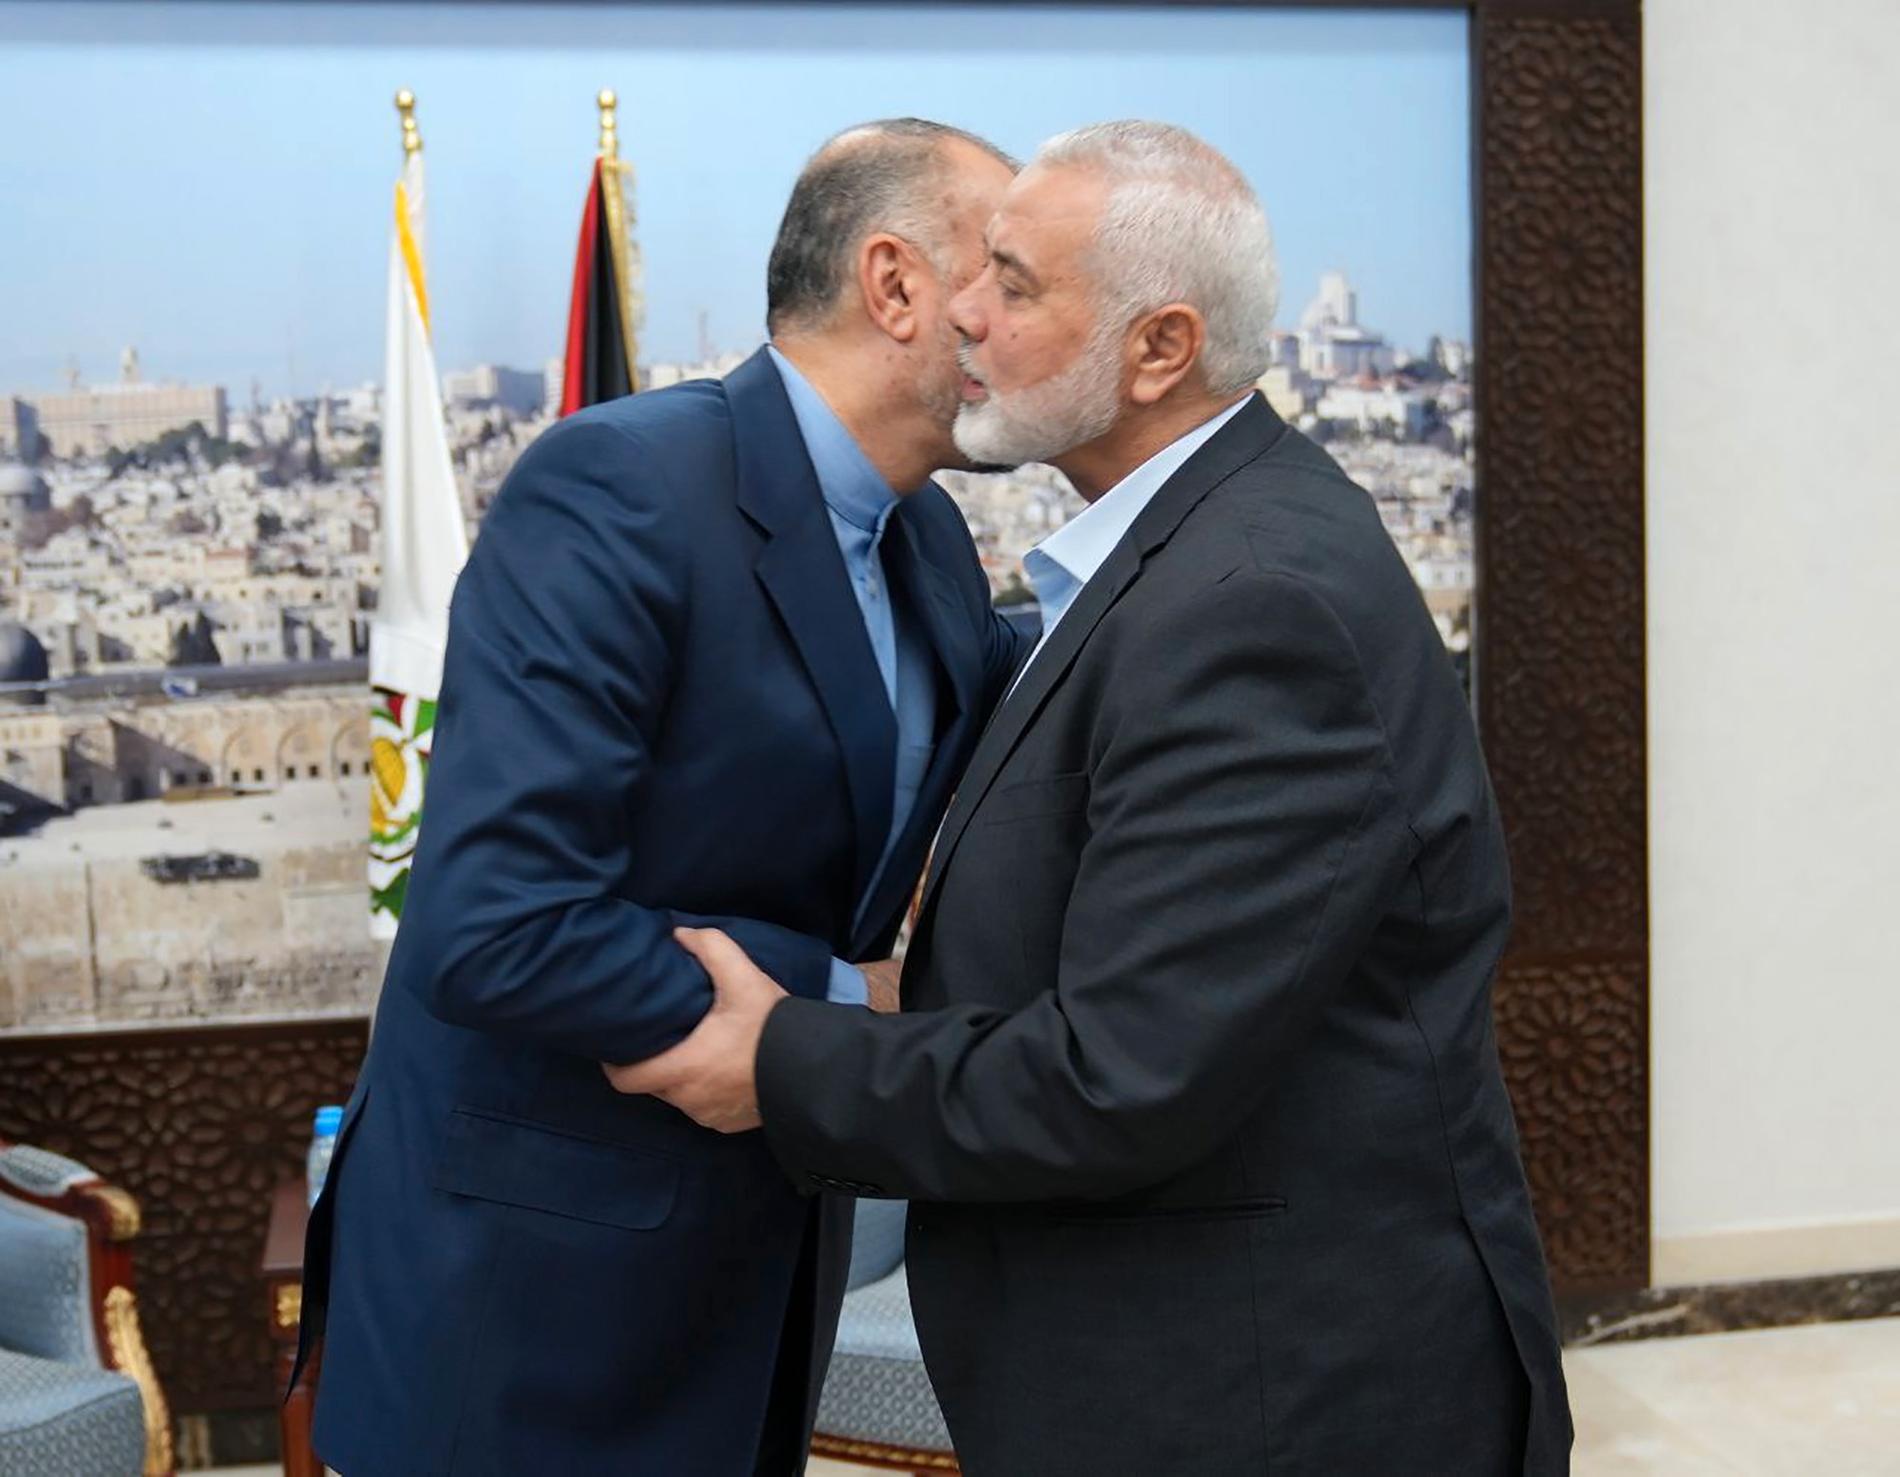 Heated meeting: Iranian Foreign Minister Hossein Amir Abdollahian met (on television) with Hamas leader Ismail Haniyeh in Qatar on October 31.